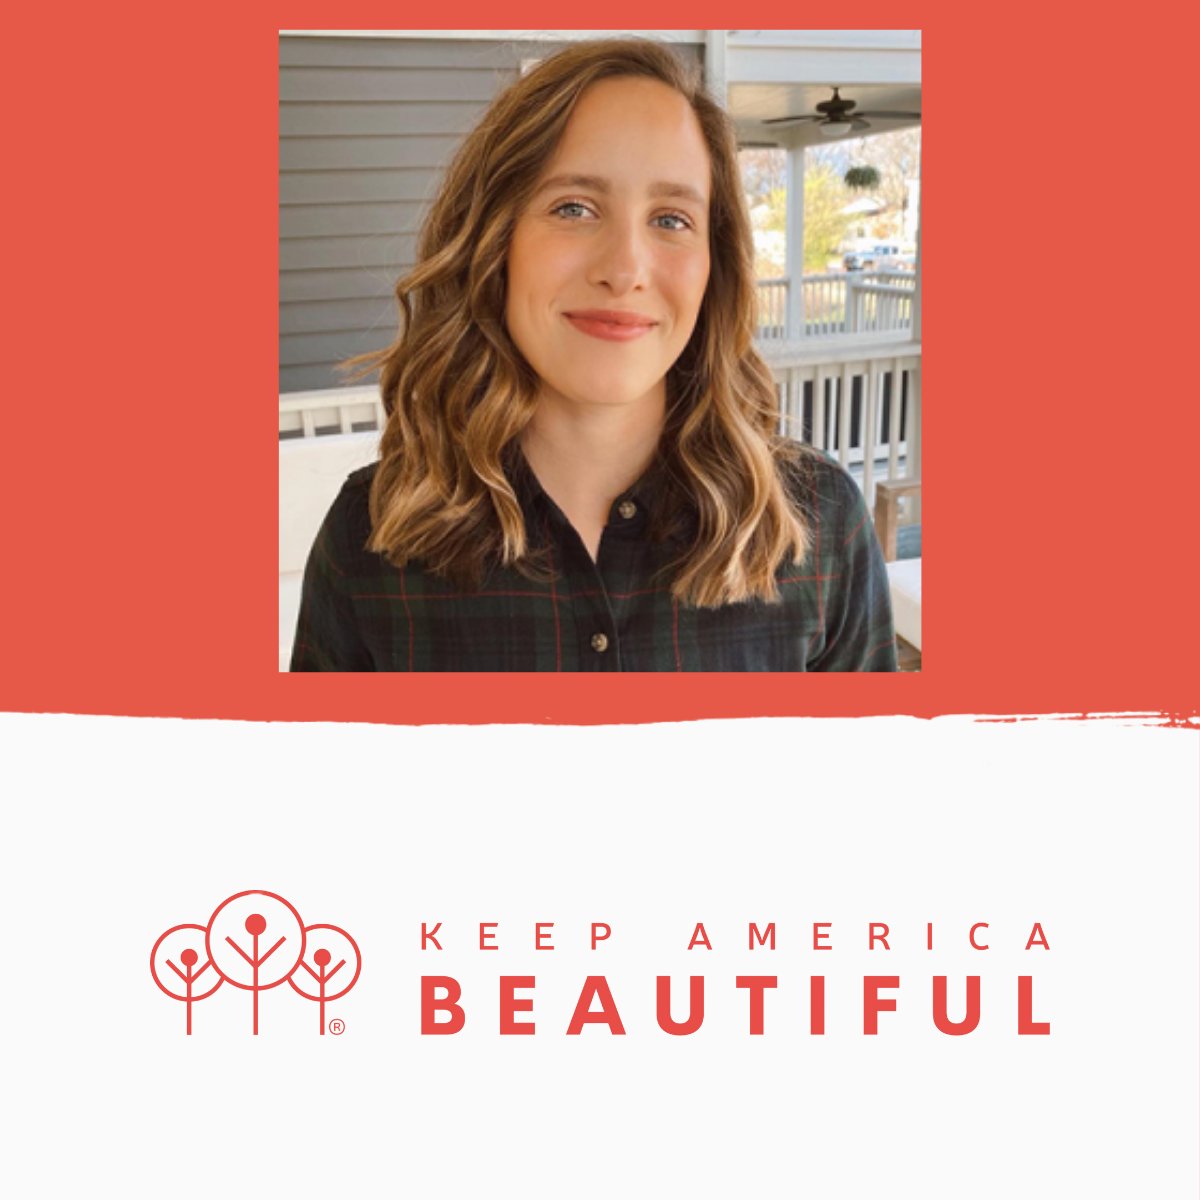 🚨 Staff Spotlight 🚨 We’re so grateful to have Erin Slaughter, our Development Manager, as part of the #KeepAmericaBeautiful team! Her dedication to creating cleaner, greener, more beautiful communities shines. Learn more about her: bit.ly/4aUz5xv #DoBeautifulThings